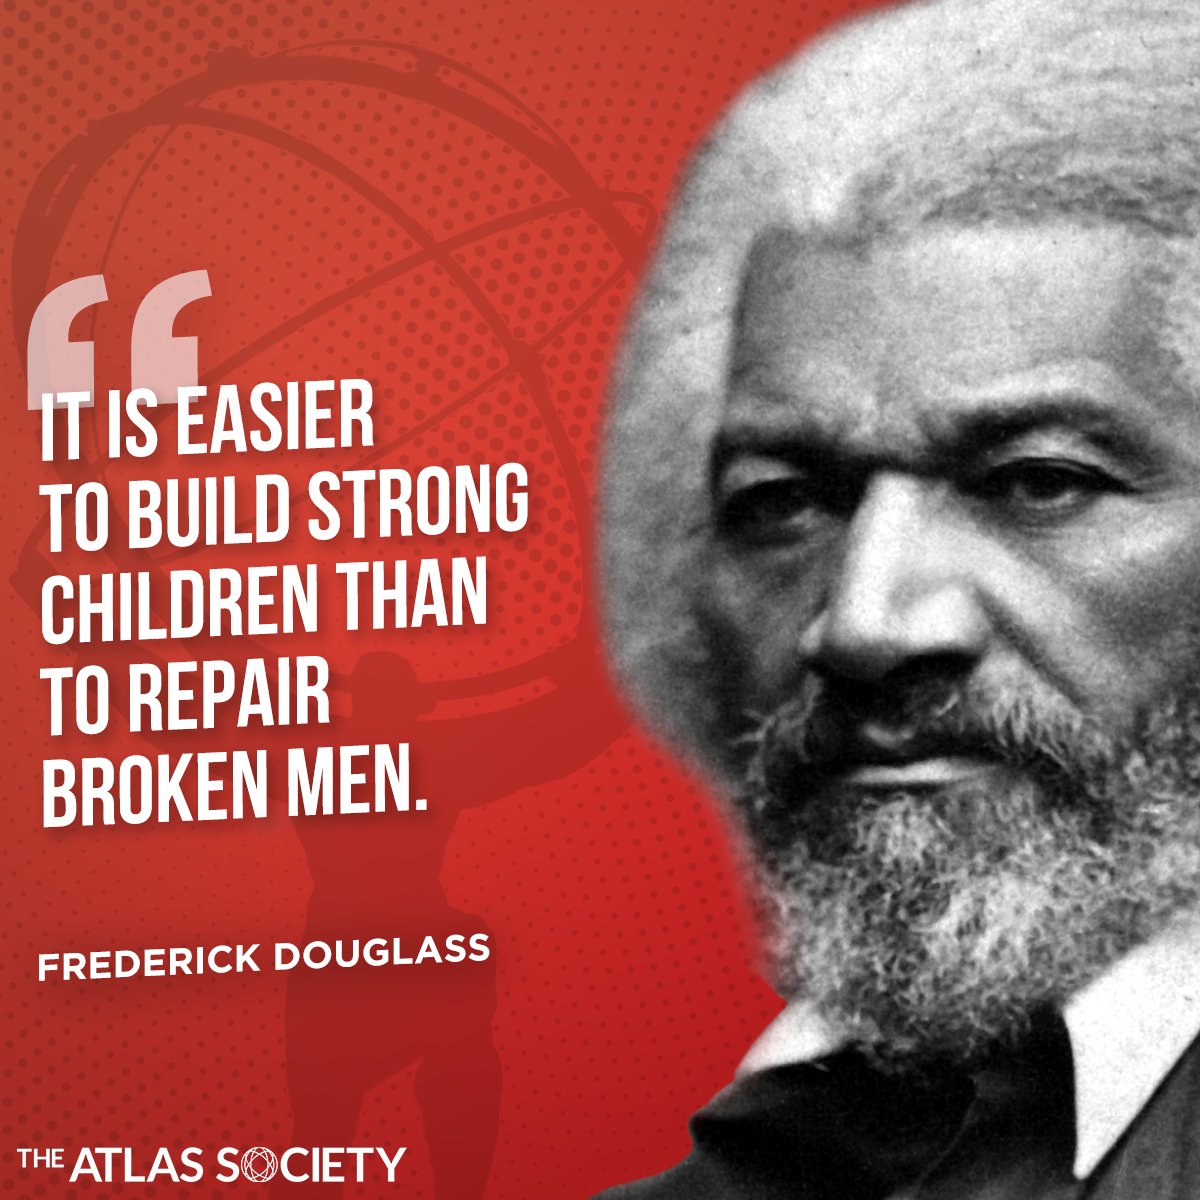 RT @TheAtlasSociety: Absolutely! Frederick Douglass Was Spot On! #Motivation #Freedom #AynRand https://t.co/y0P3ihVXcO